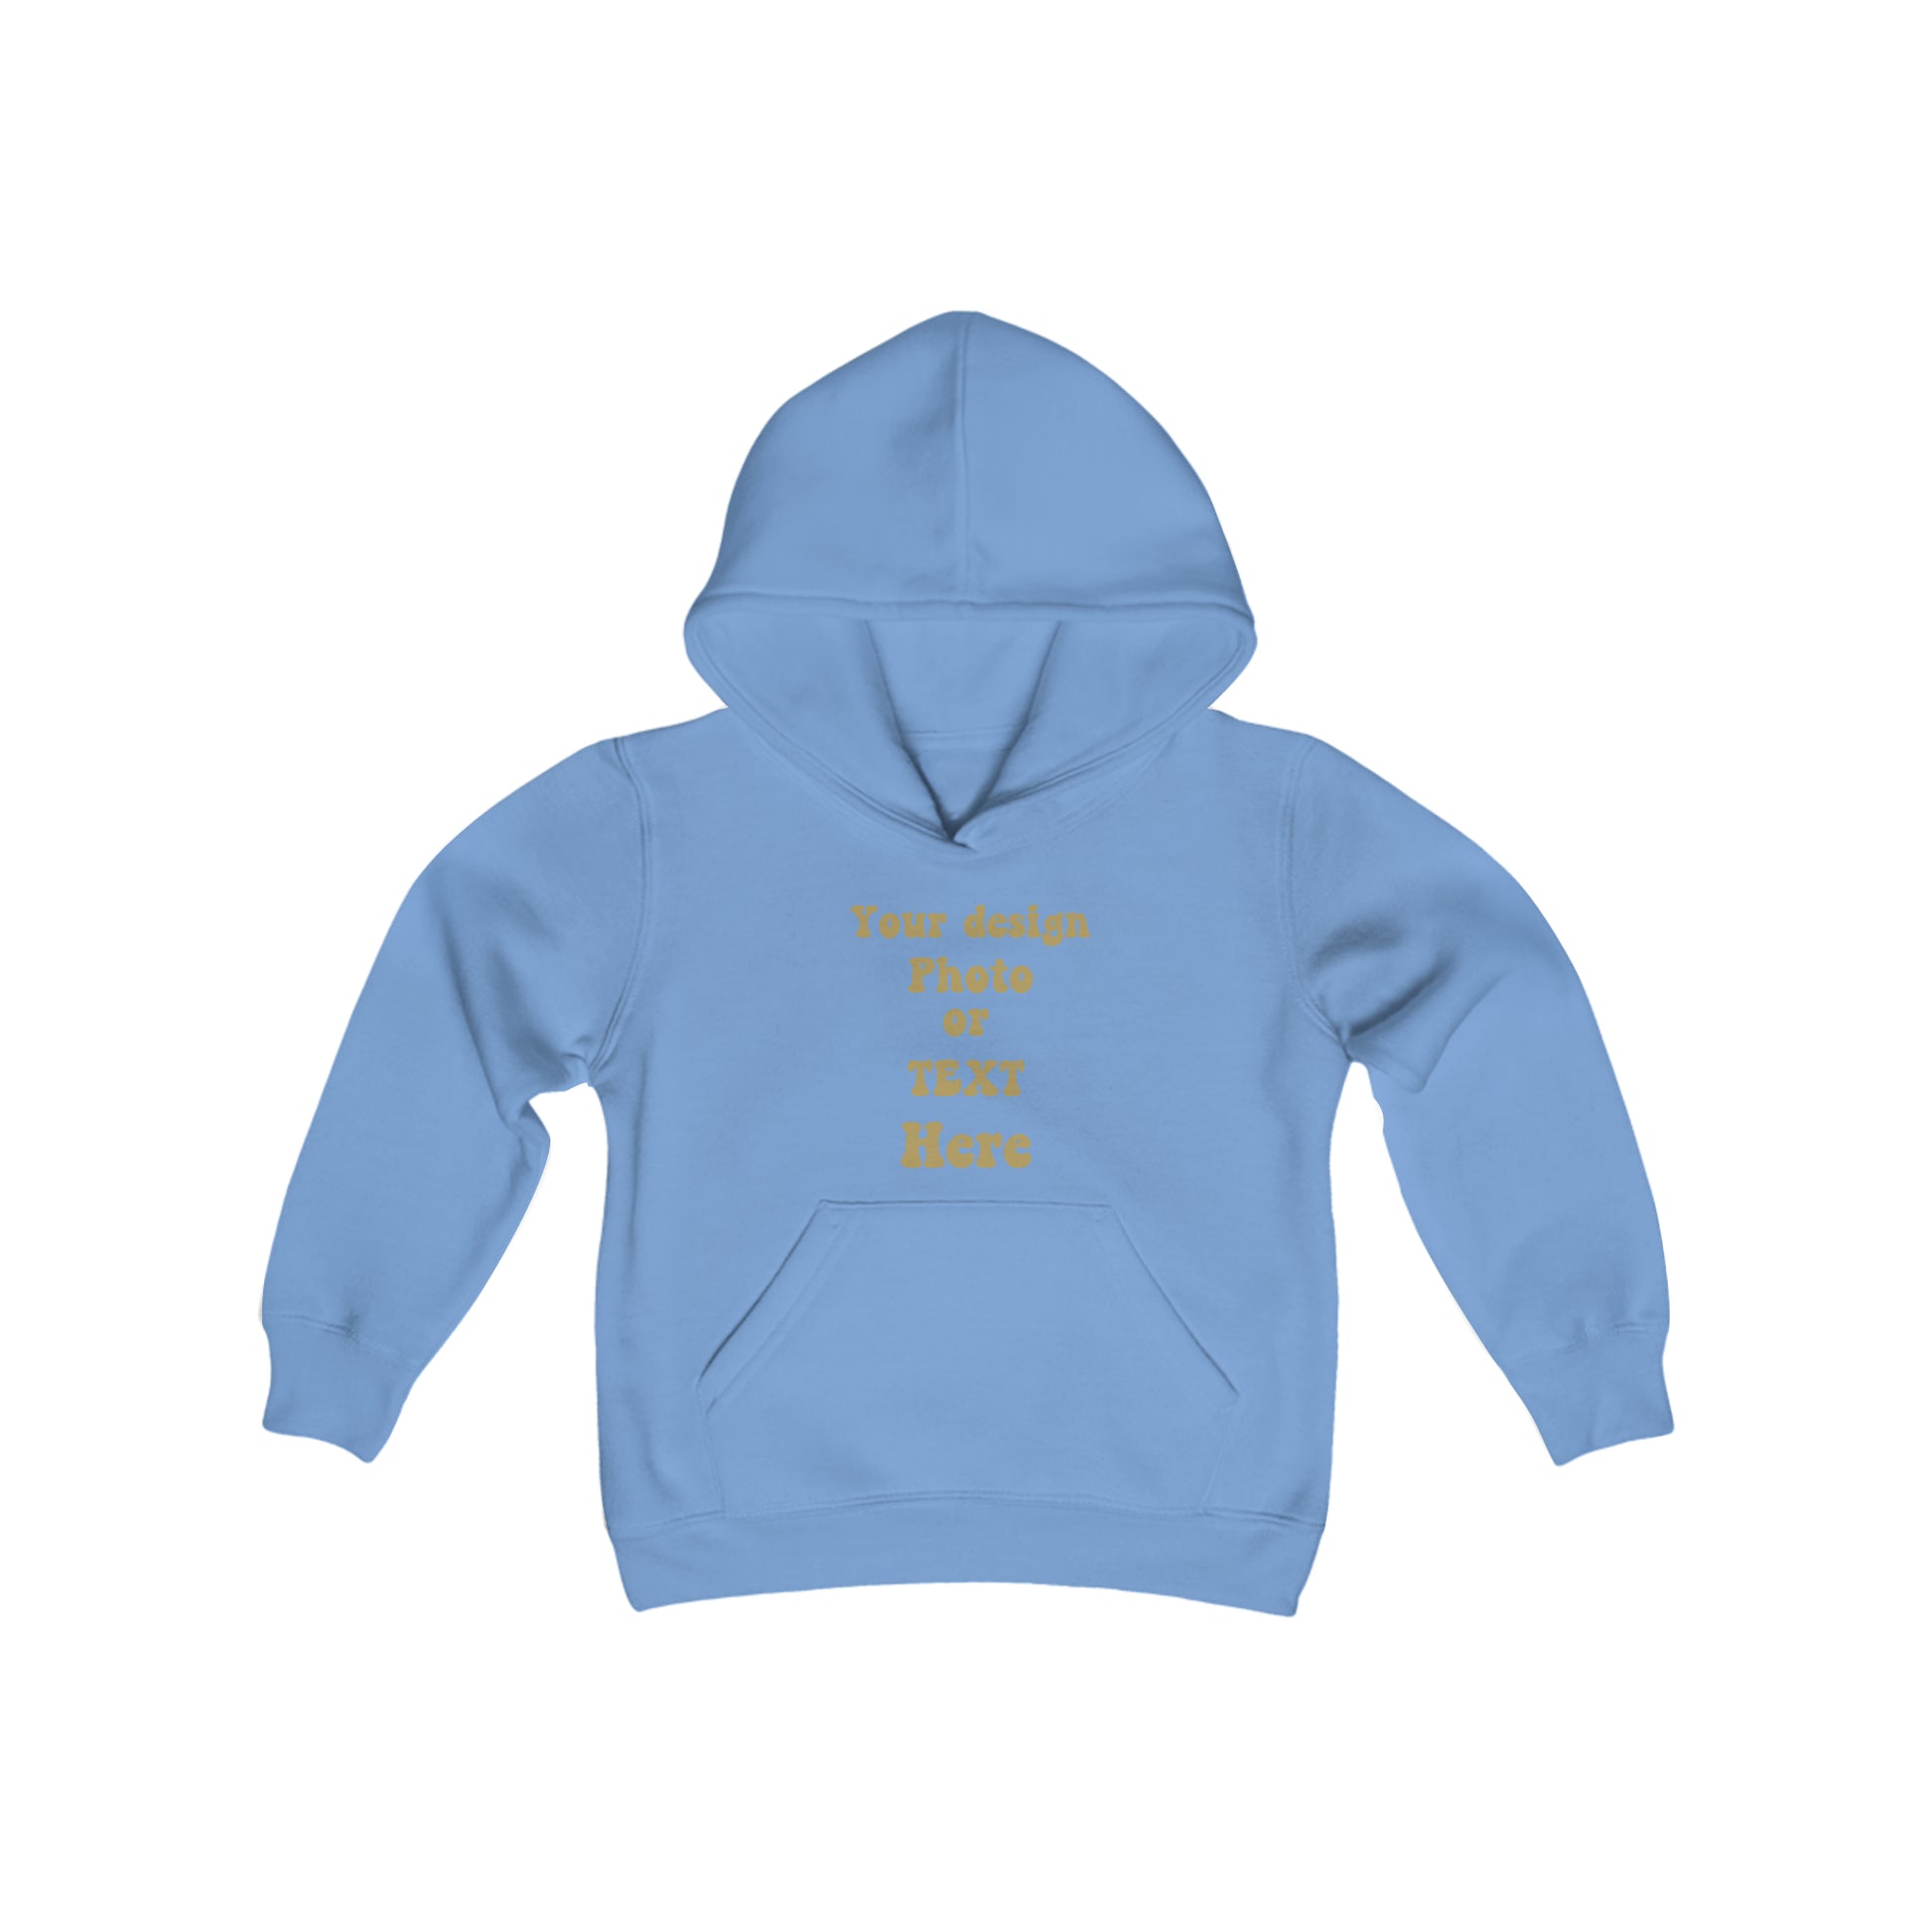 Youth Heavy Blend Hooded Sweatshirt - Personalize It with Text and Photo Kids clothes Carolina Blue S 